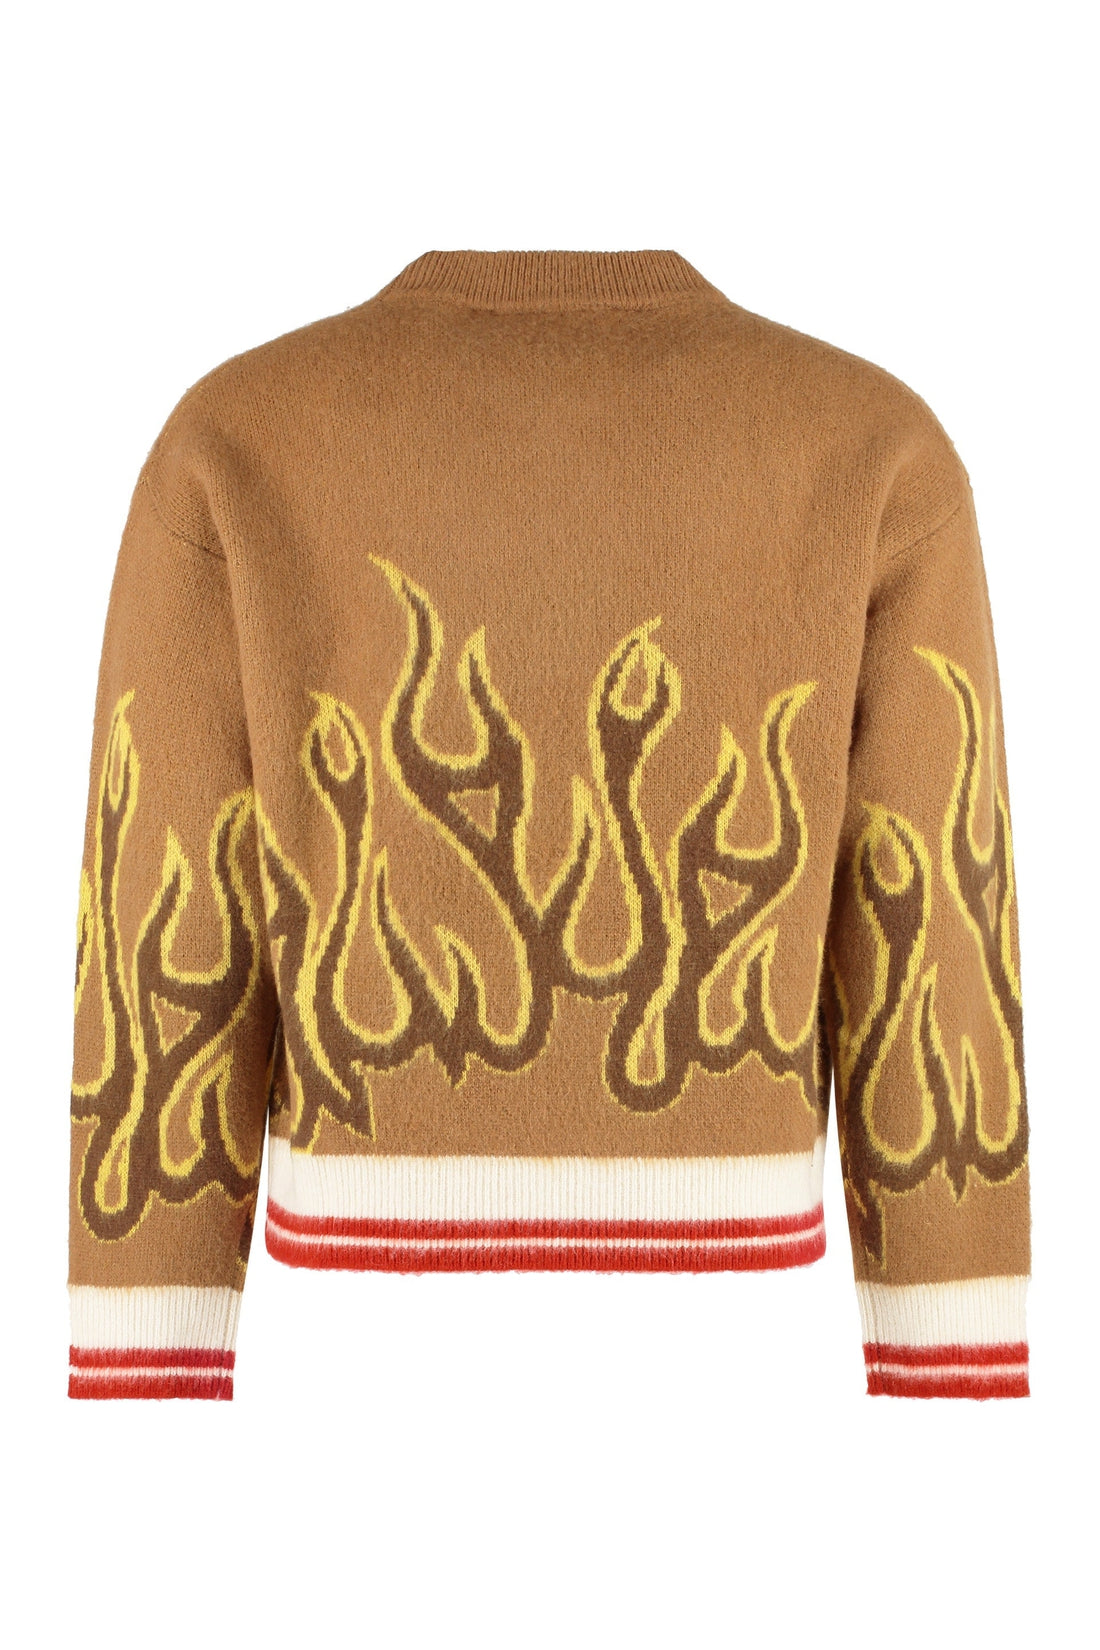 Palm Angels-OUTLET-SALE-Crew-neck wool sweater-ARCHIVIST